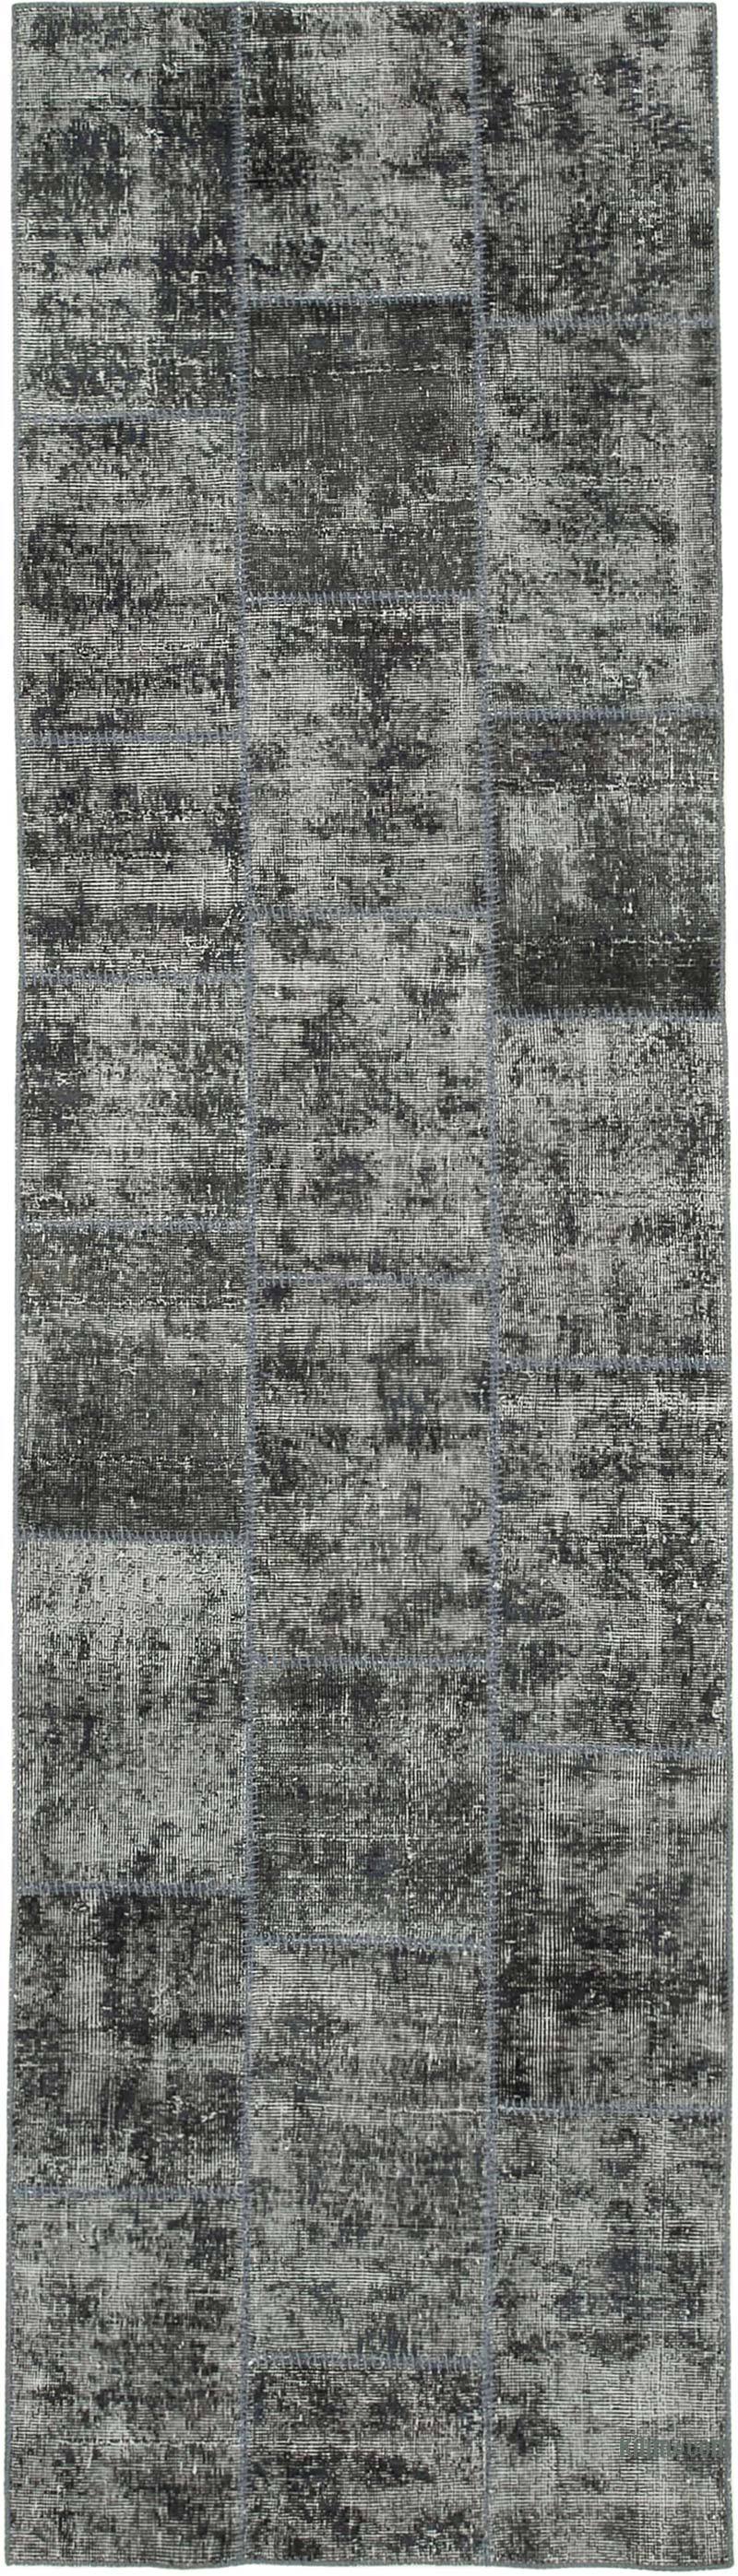 Grey Patchwork Hand-Knotted Turkish Runner - 2' 9" x 10'  (33 in. x 120 in.) - K0053999